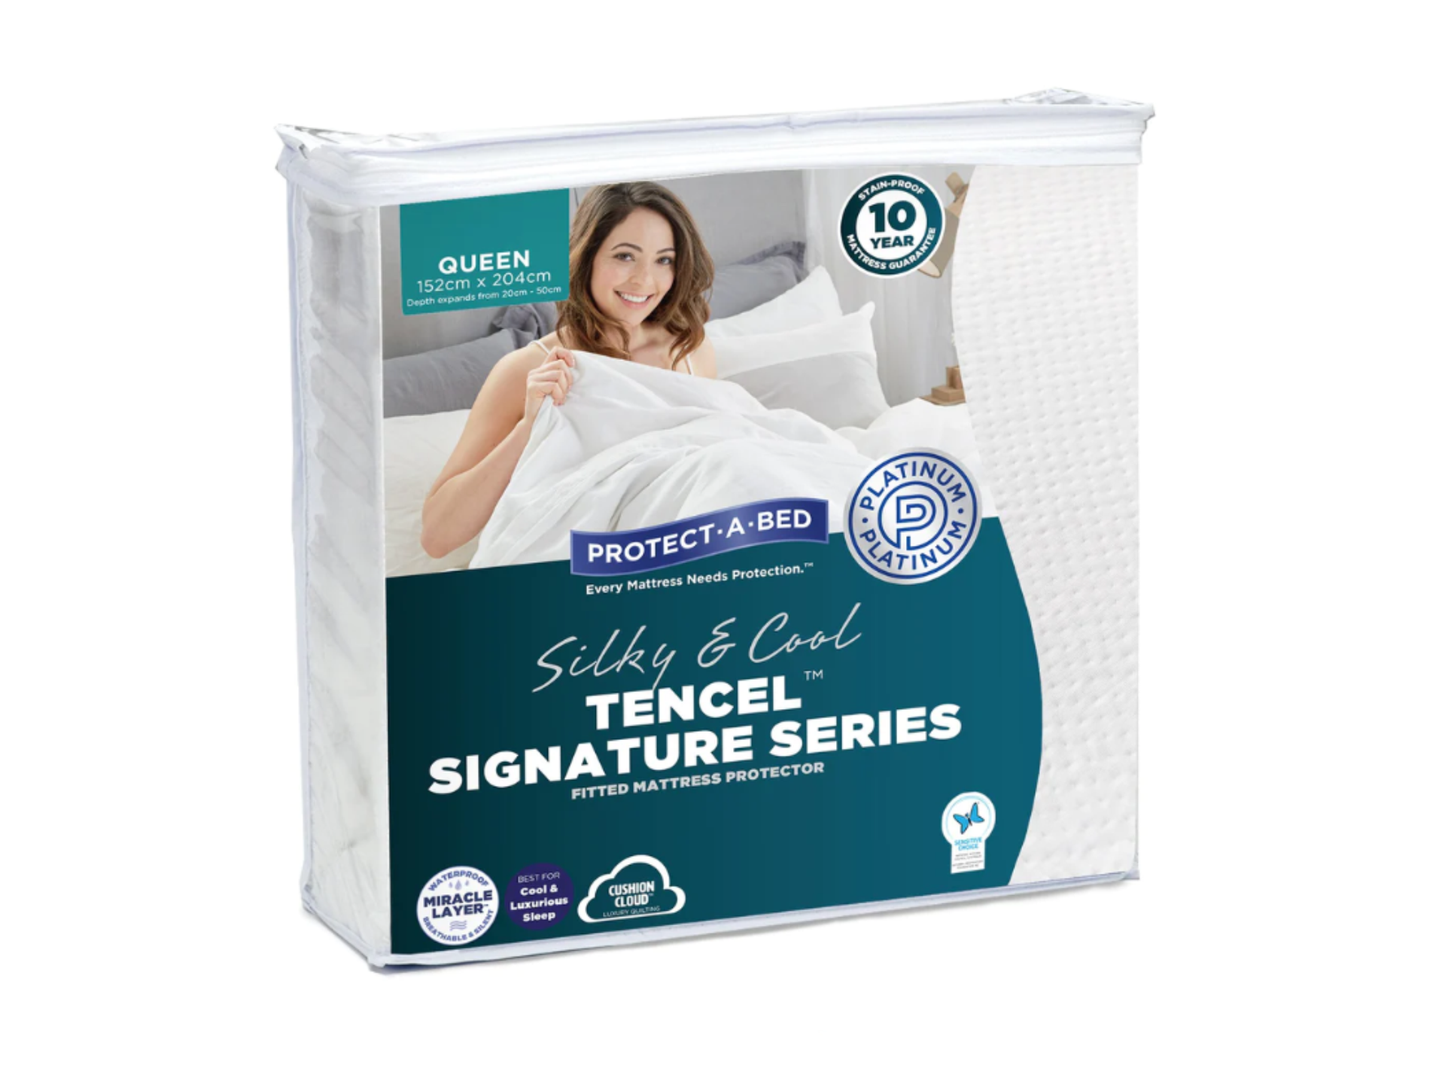 Protect-A-Bed Bundle featuring Tencel® Signature Series Double